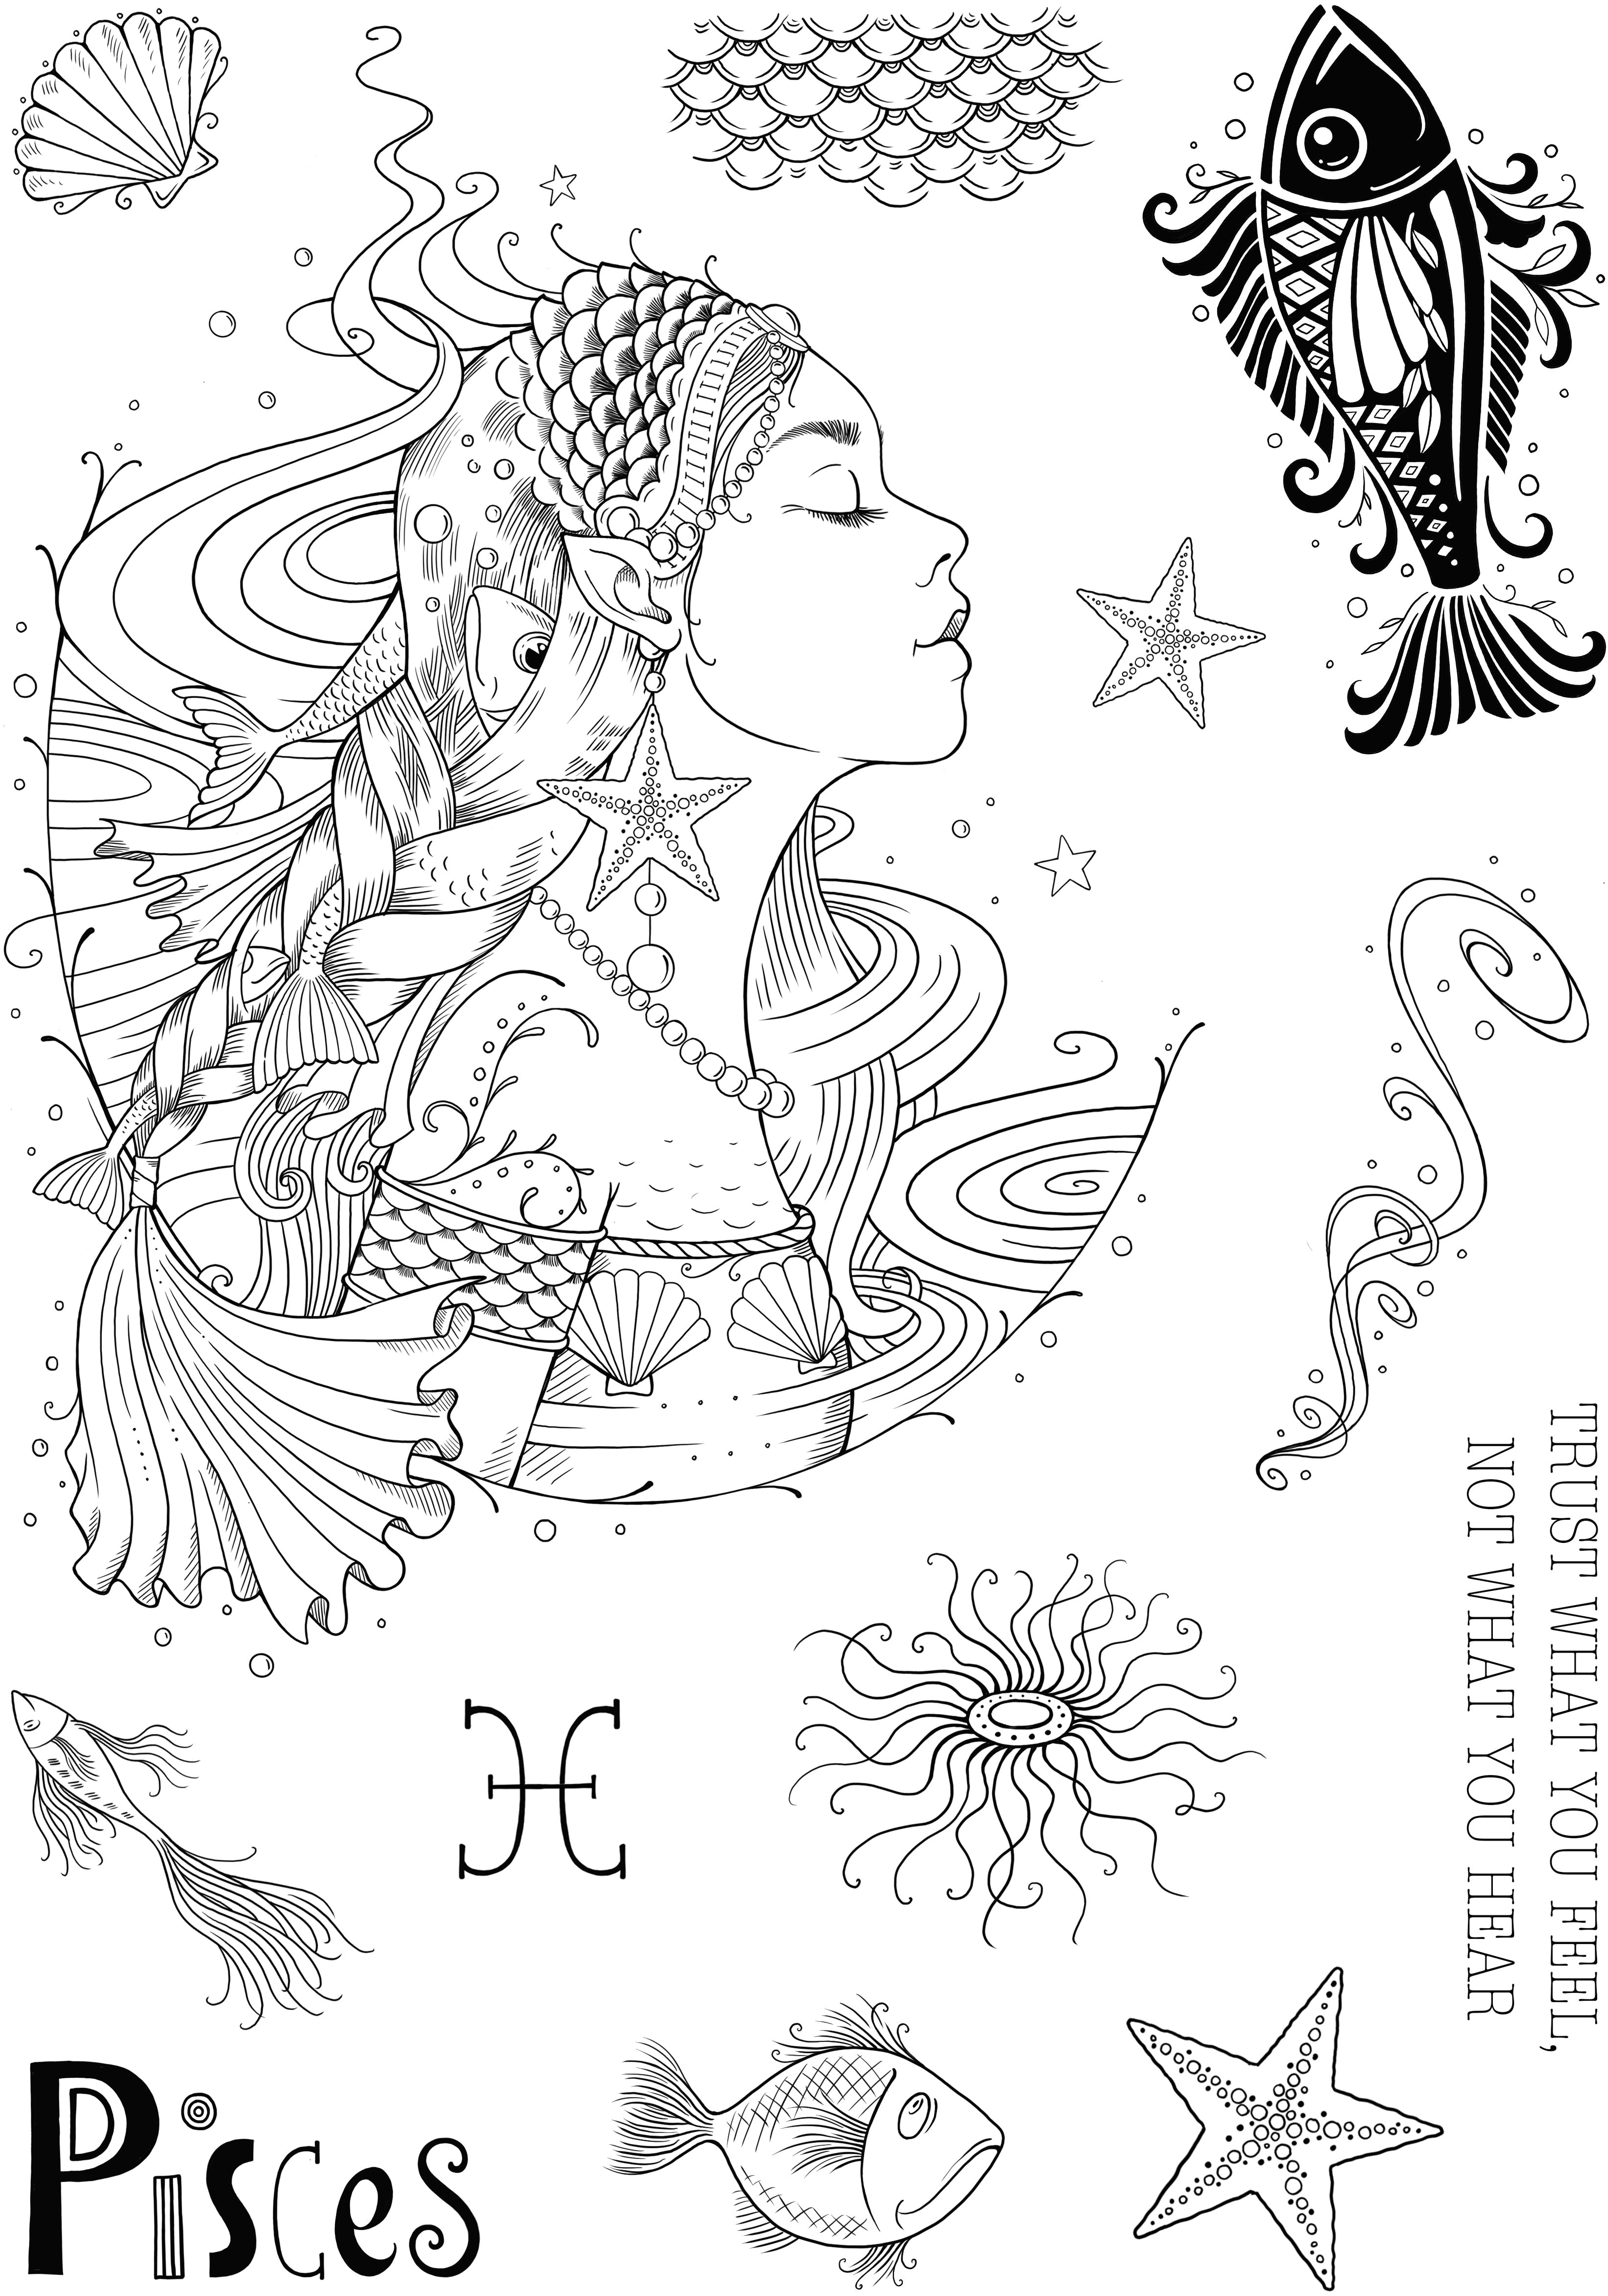 Pink Ink Designs Pisces - The Empath 6 in x 8 in Clear Stamp Set